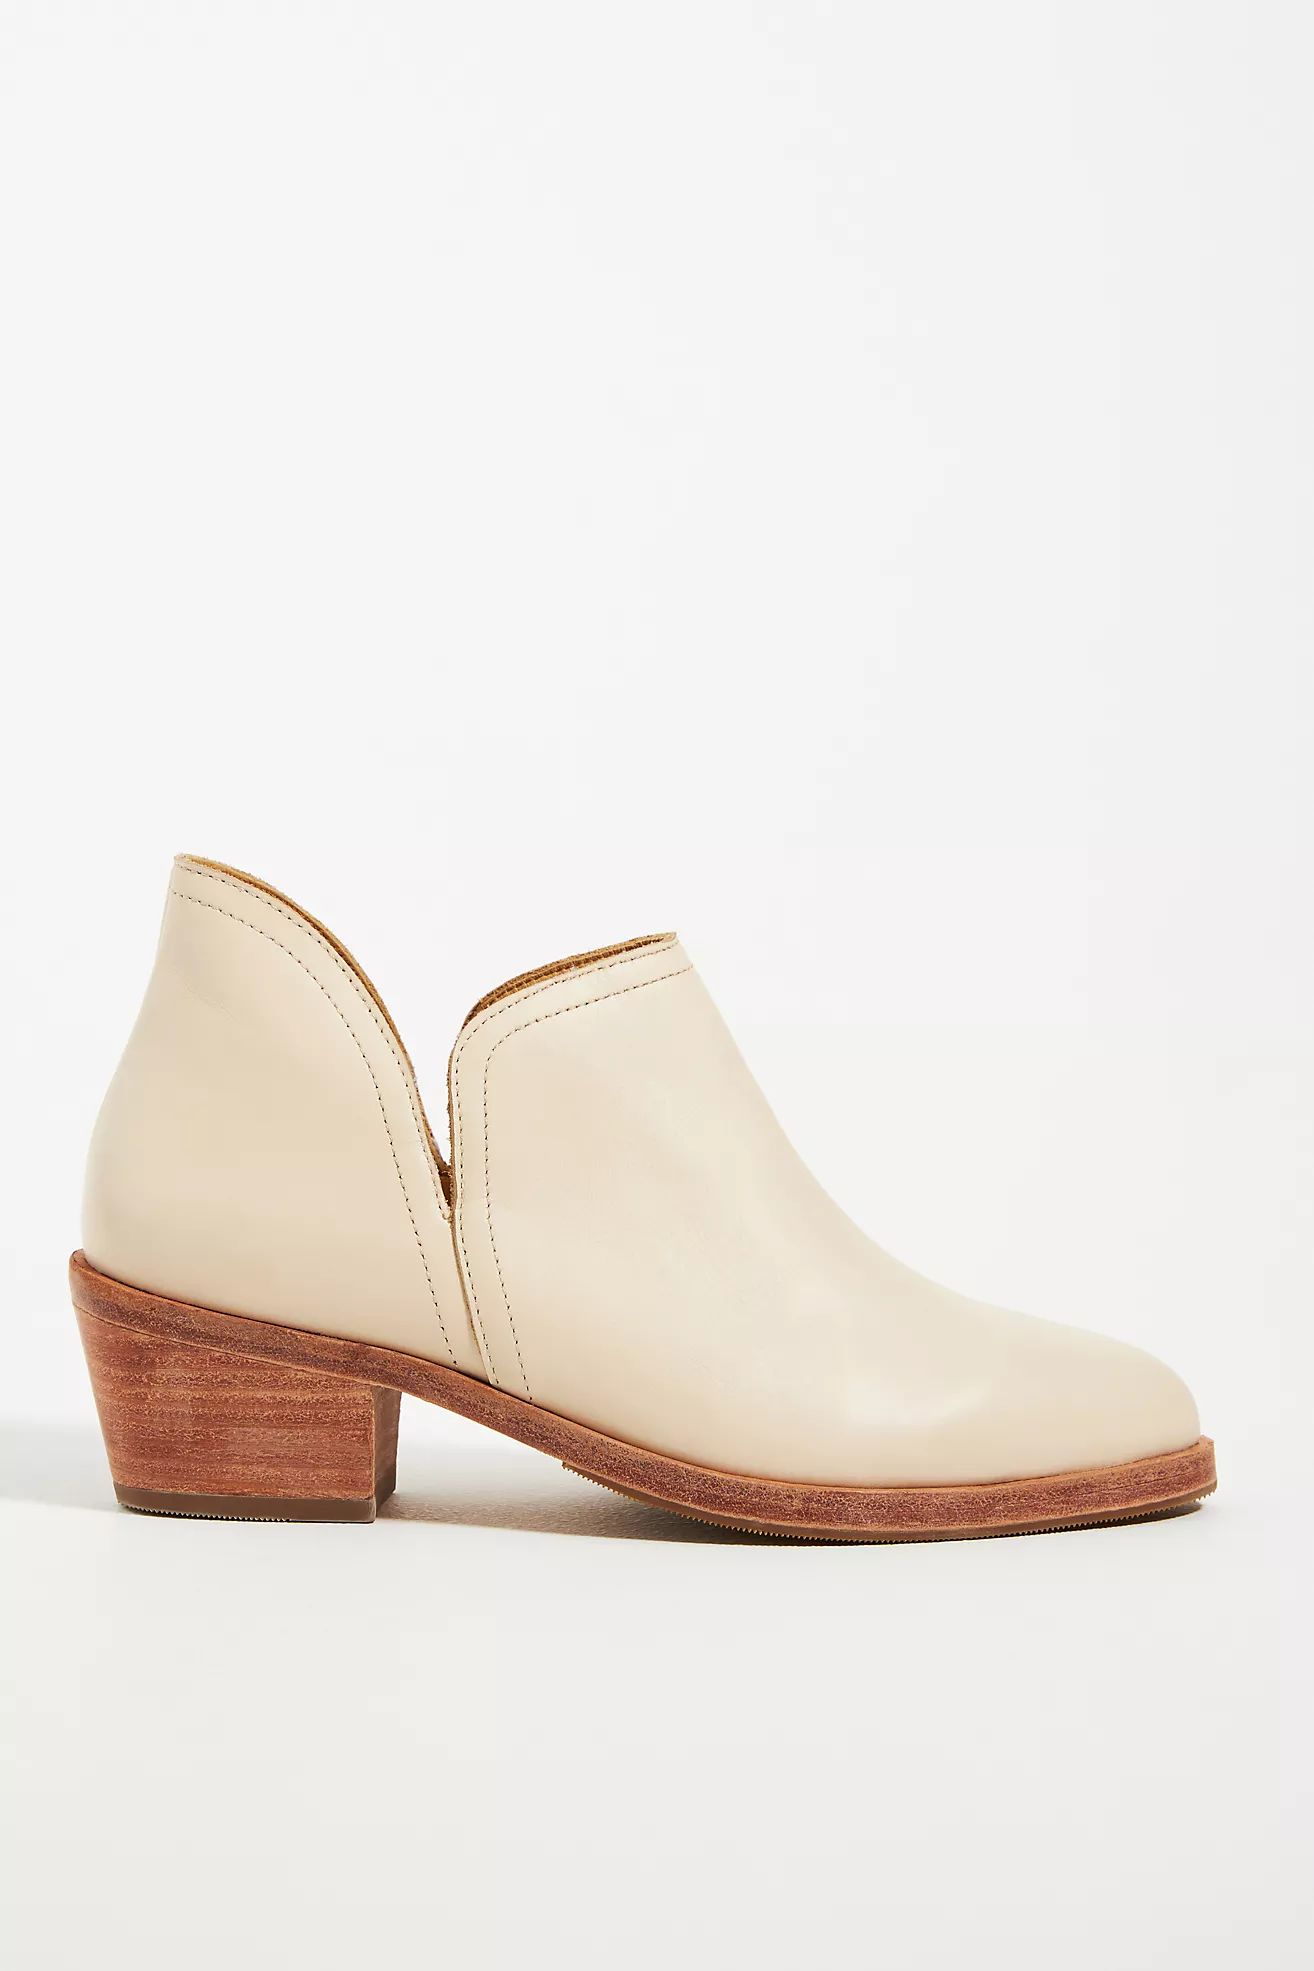 Nisolo Everyday Ankle Booties | Anthropologie (US)